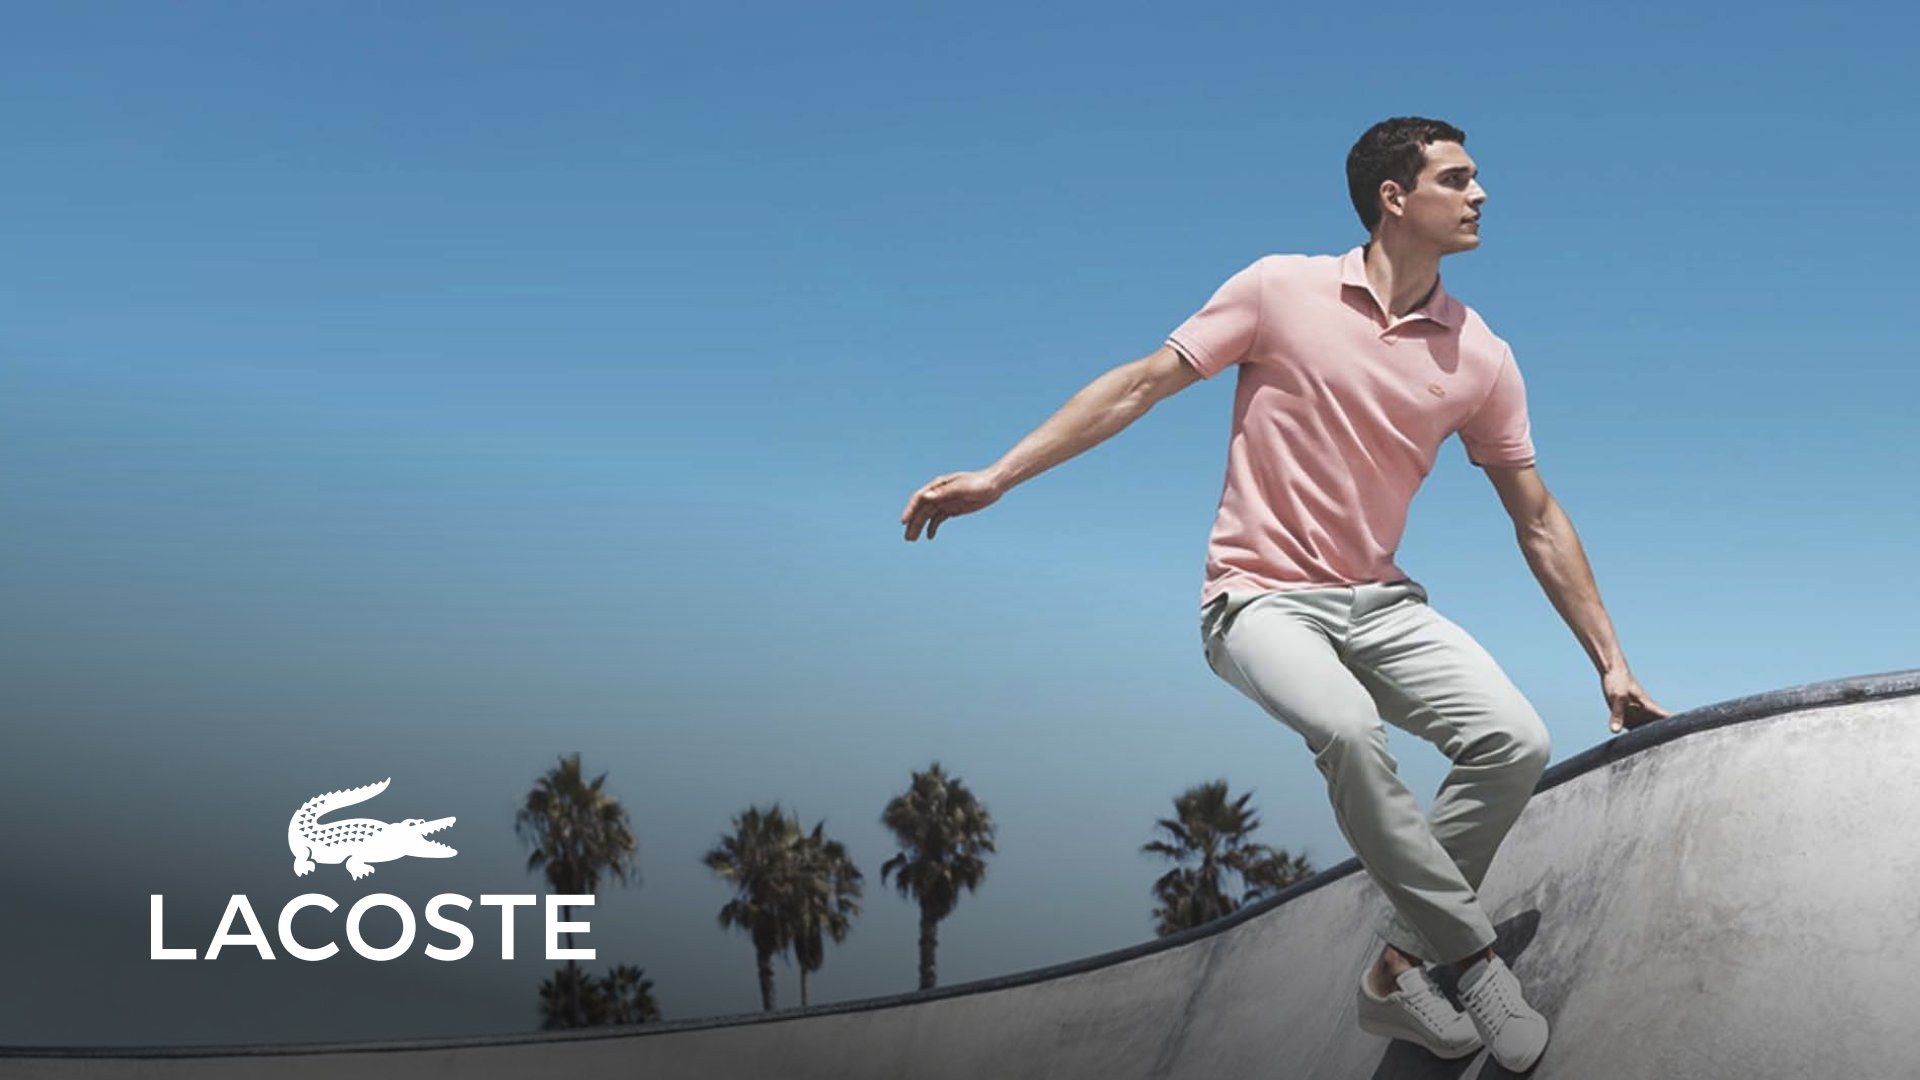 Lacoste - North America Social Strategy